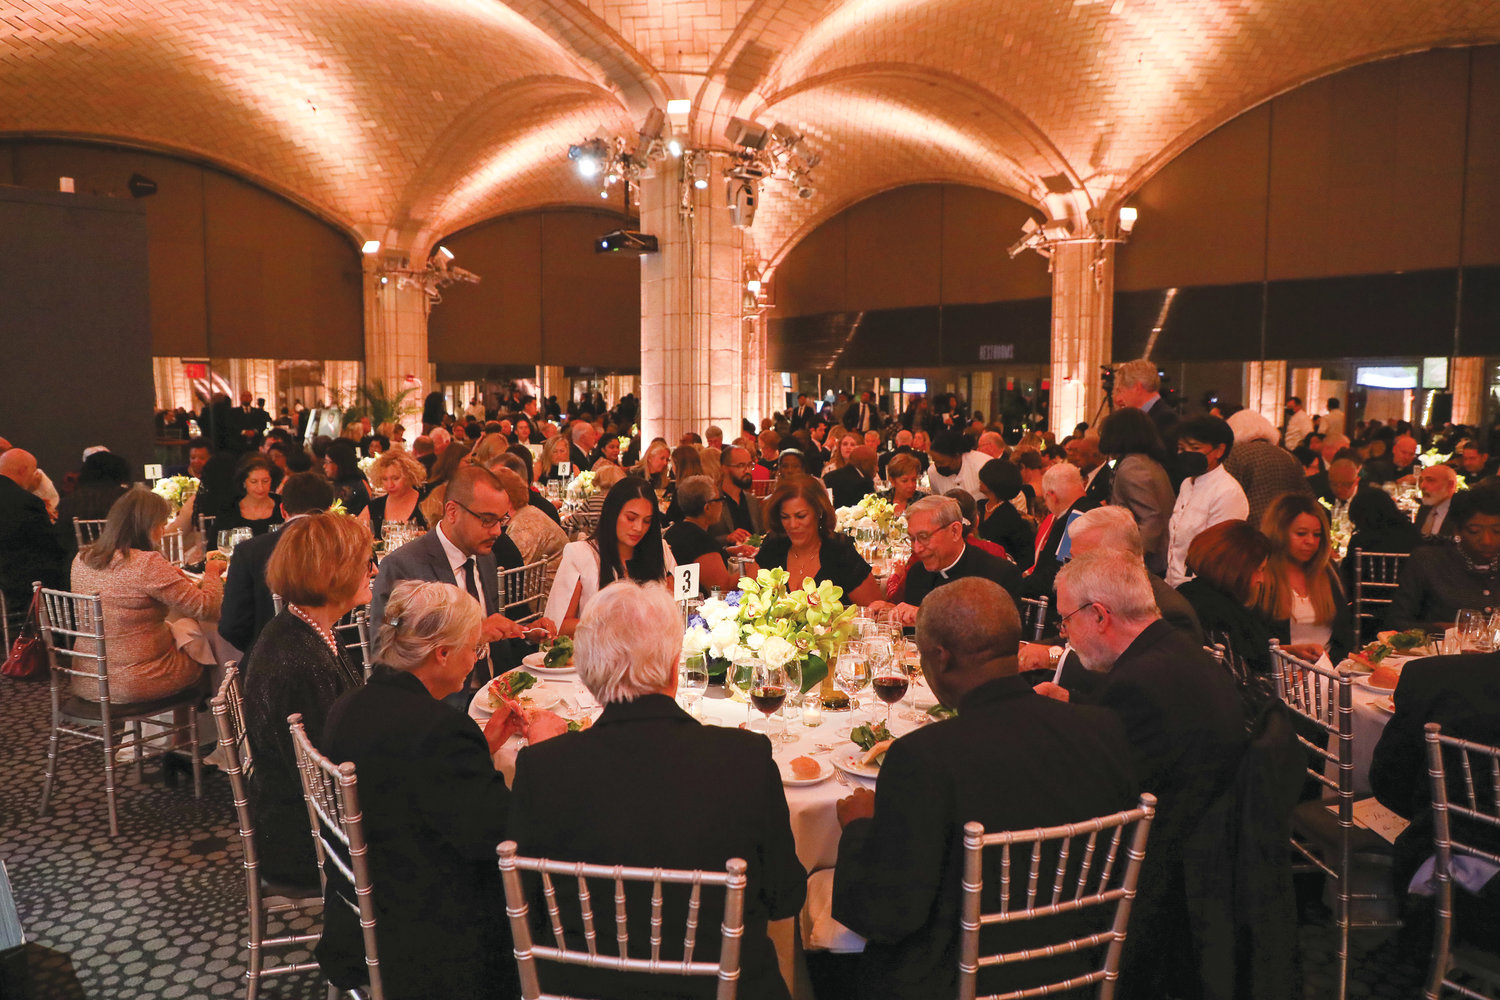 The 350 guests enjoy their meals and the convivial atmosphere at Guastavino’s in Manhattan.